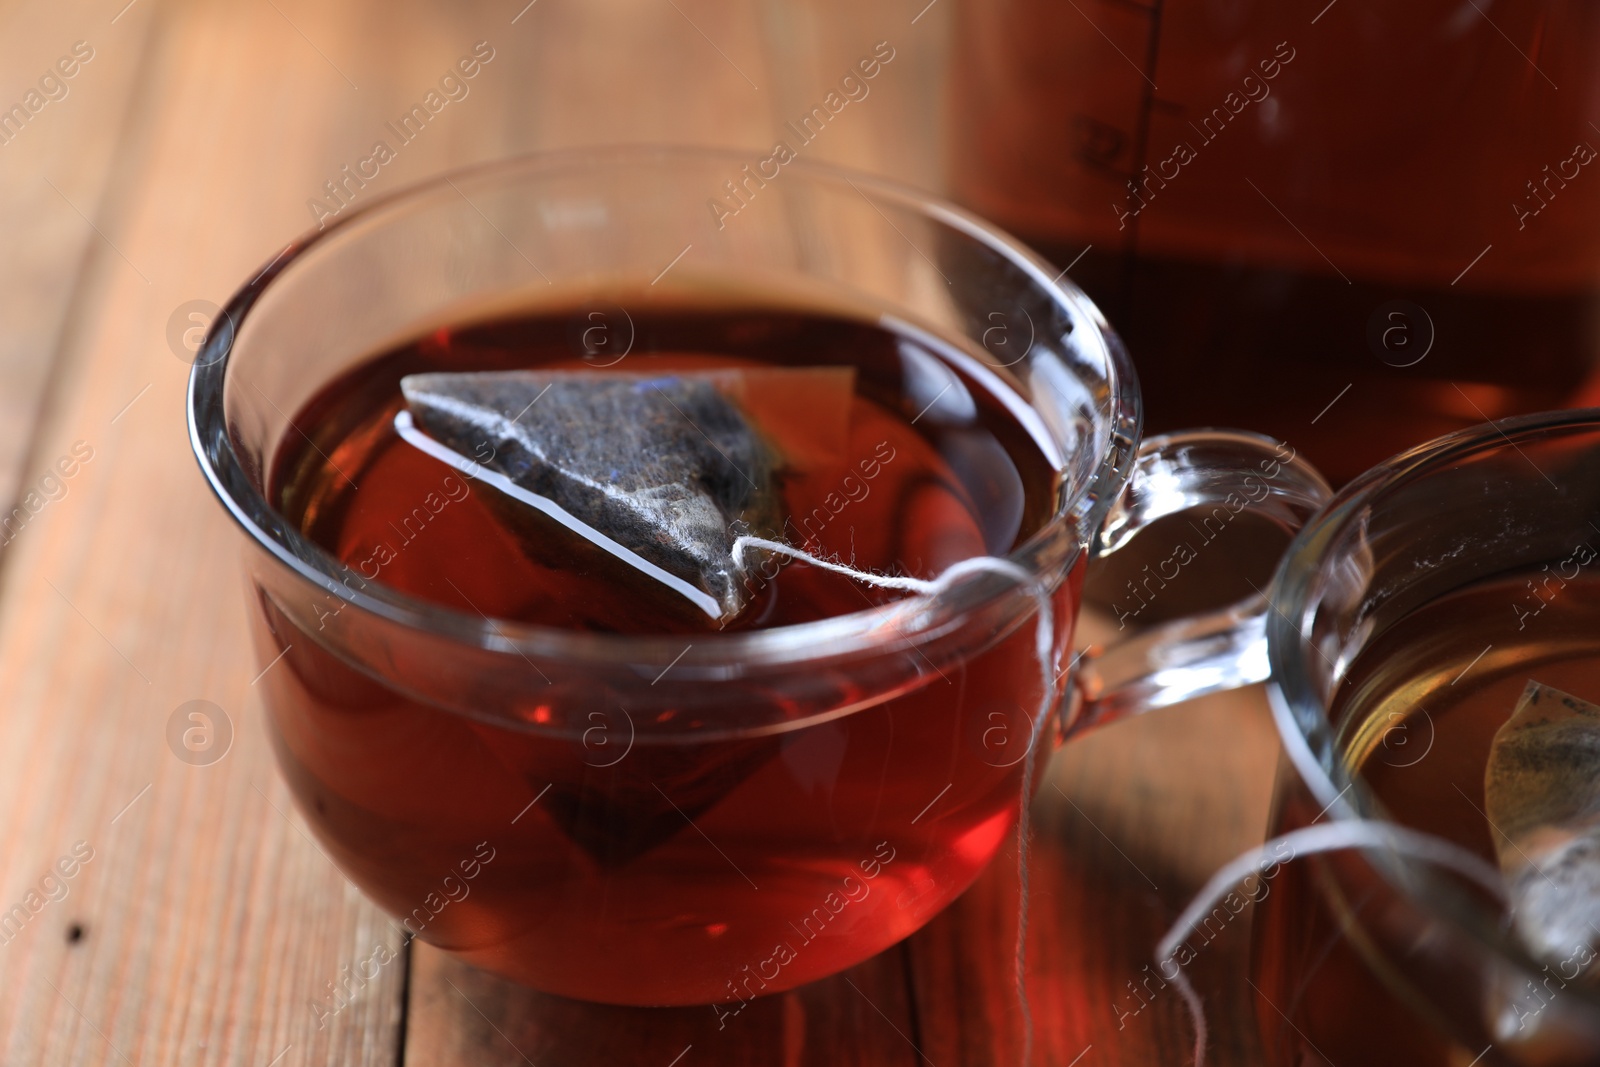 Photo of Tea bag in cup on wooden table, closeup